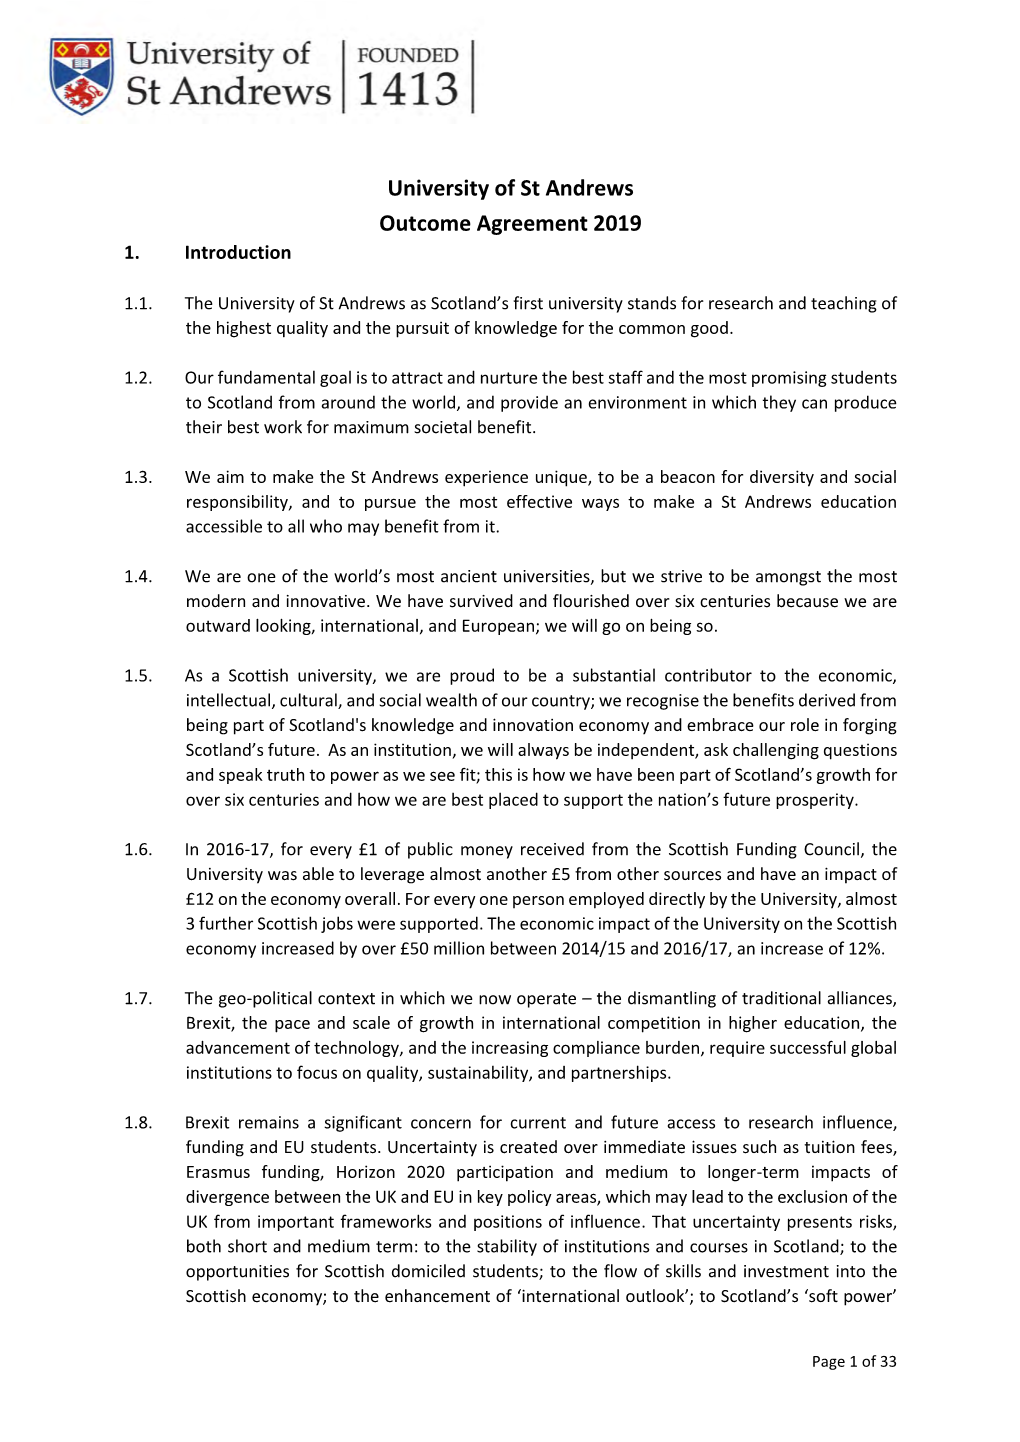 University of St Andrews Outcome Agreement 2019-20